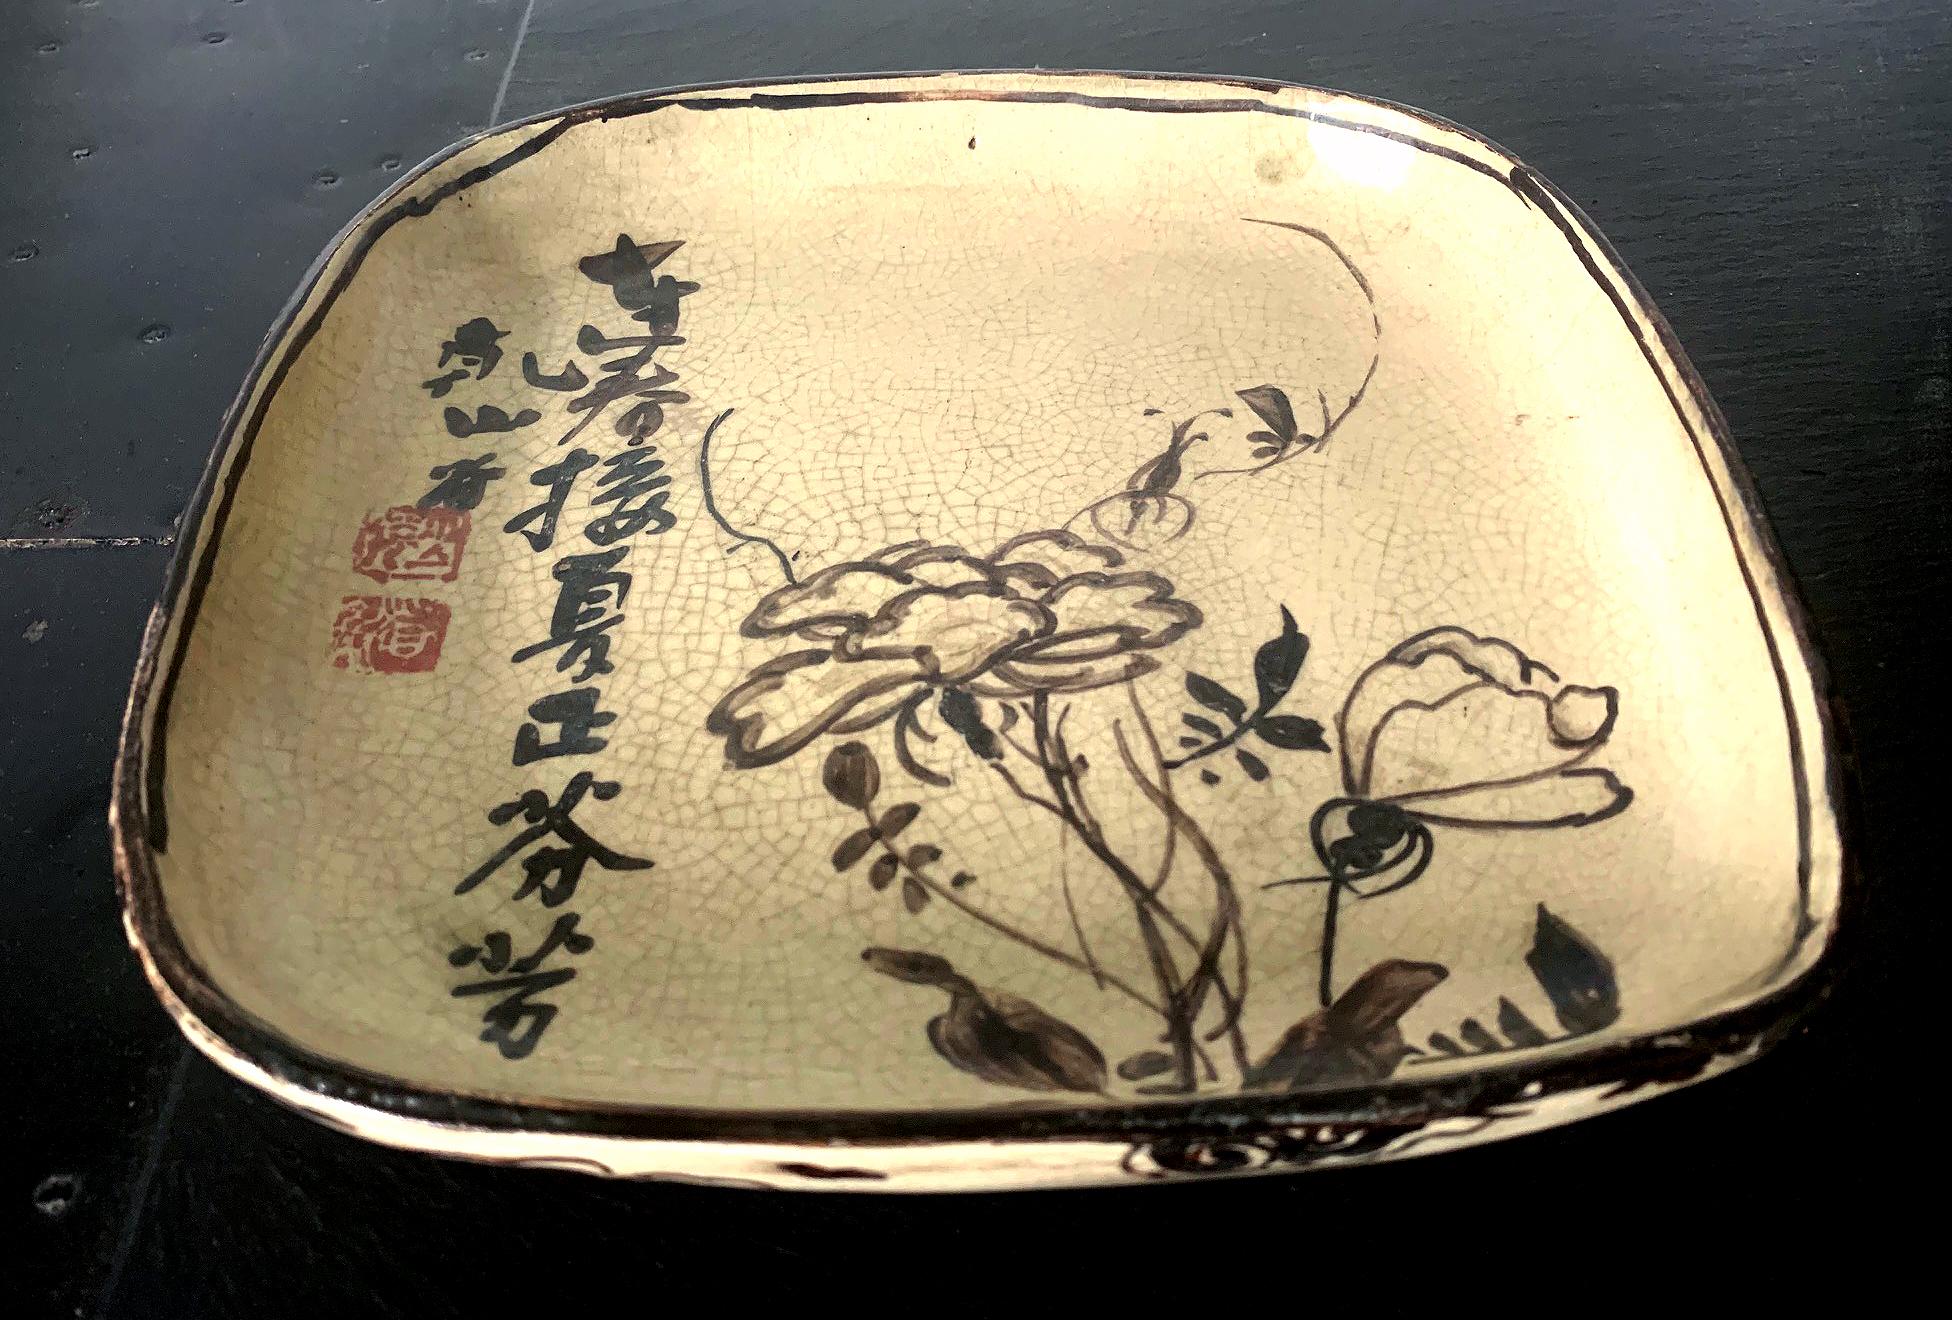 A Japanese ceramic shallow dish in square form with rounded corners from Meiji period in the style of Ogata Kenzan. The dish features a cream color crackled glaze with iron underglaze paint that evokes the aesthetic of ink painting. A bundle of